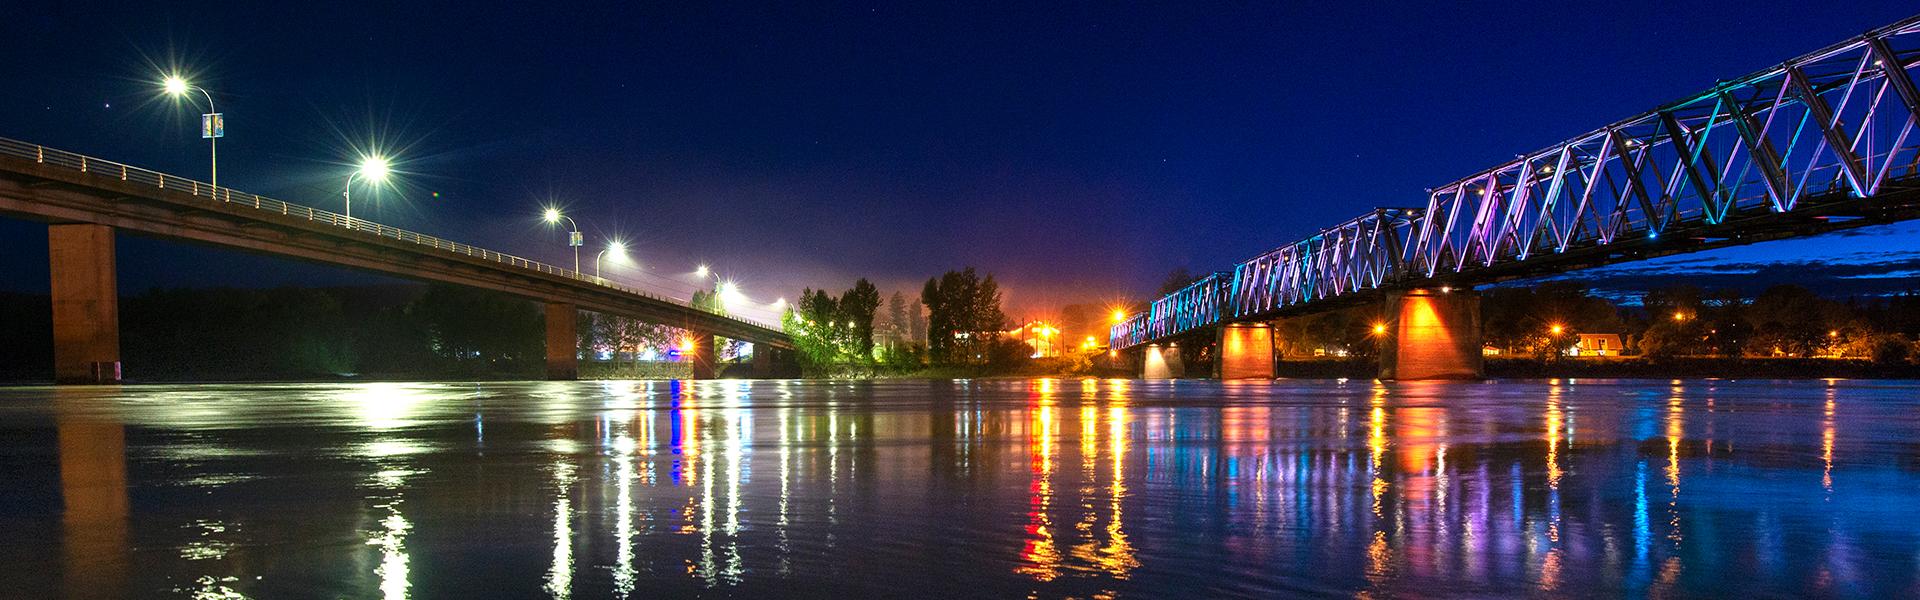 Nigh view of two bridges lit up over the Fraser River